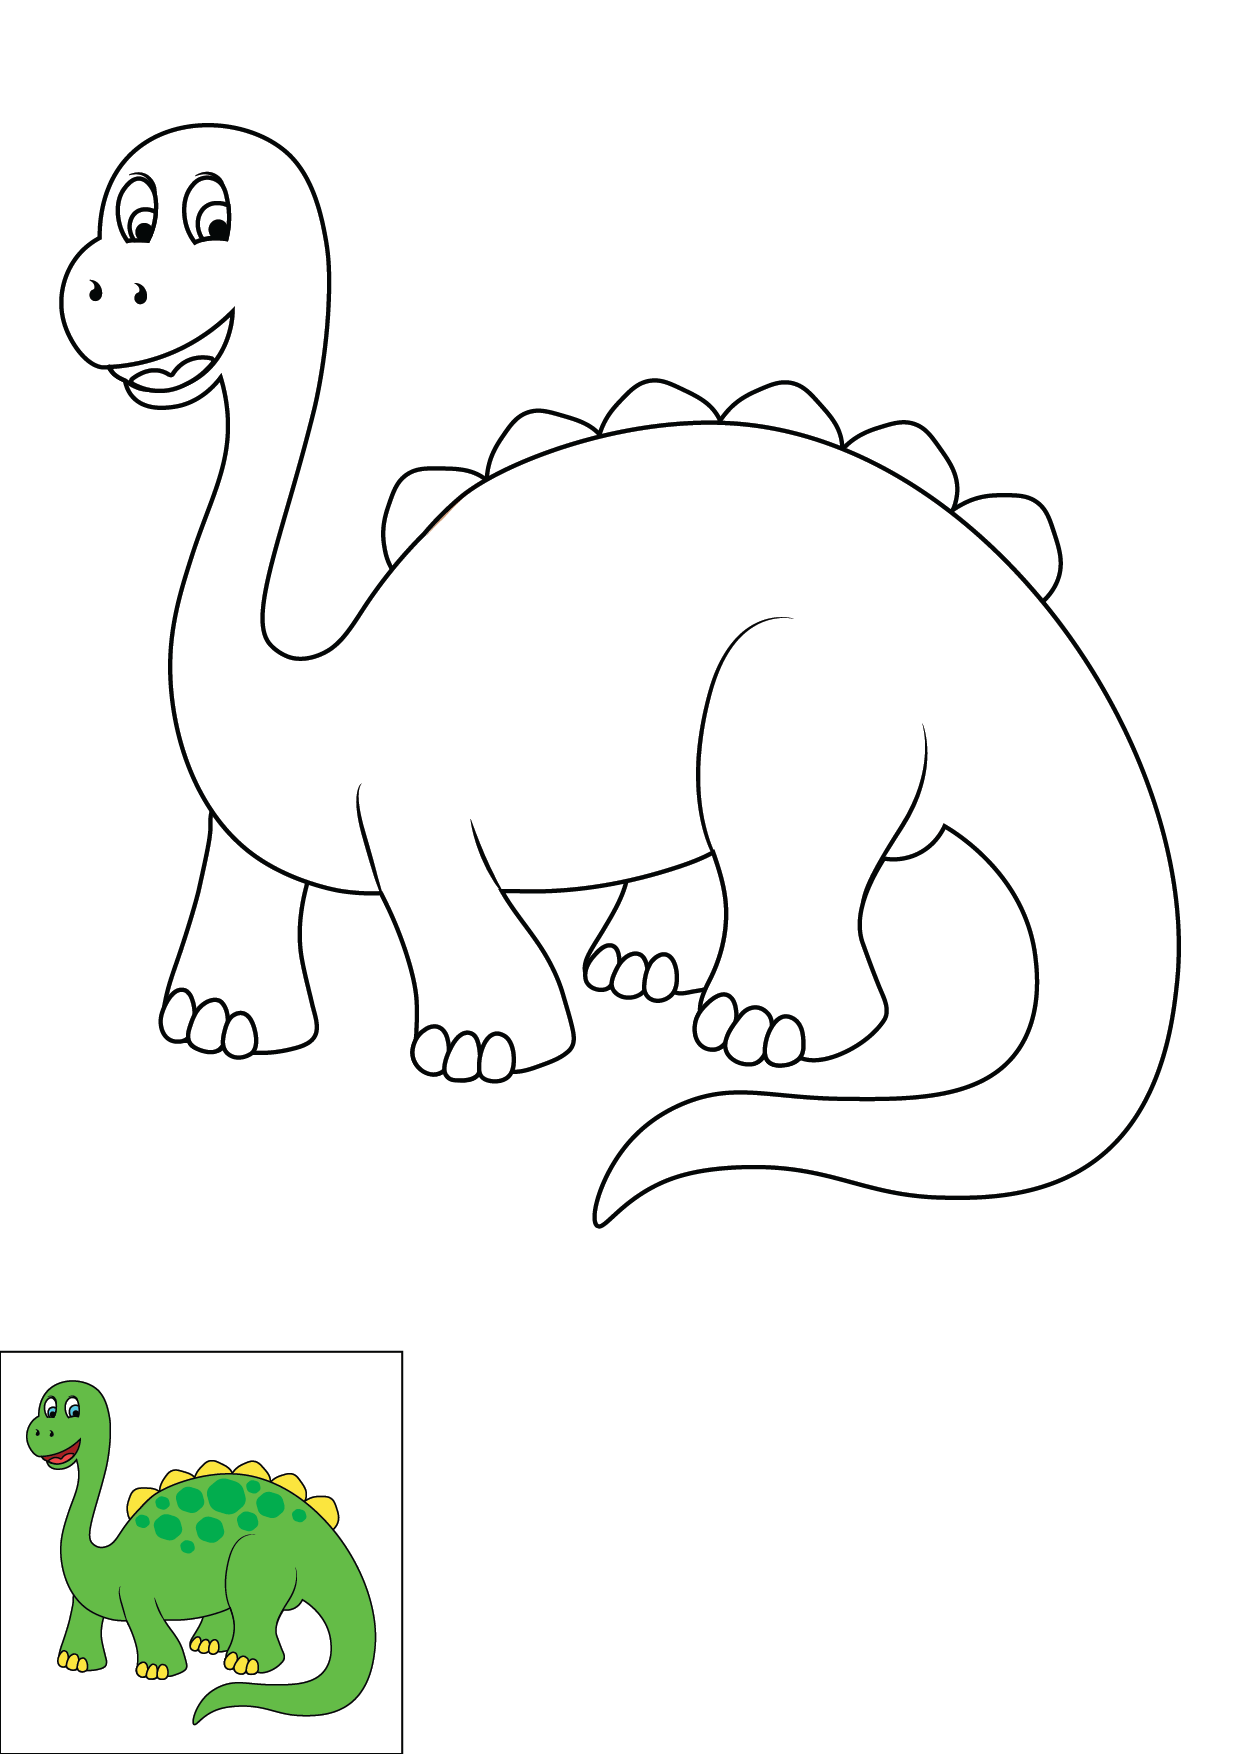 How to Draw A Dinosaur Step by Step Printable Color